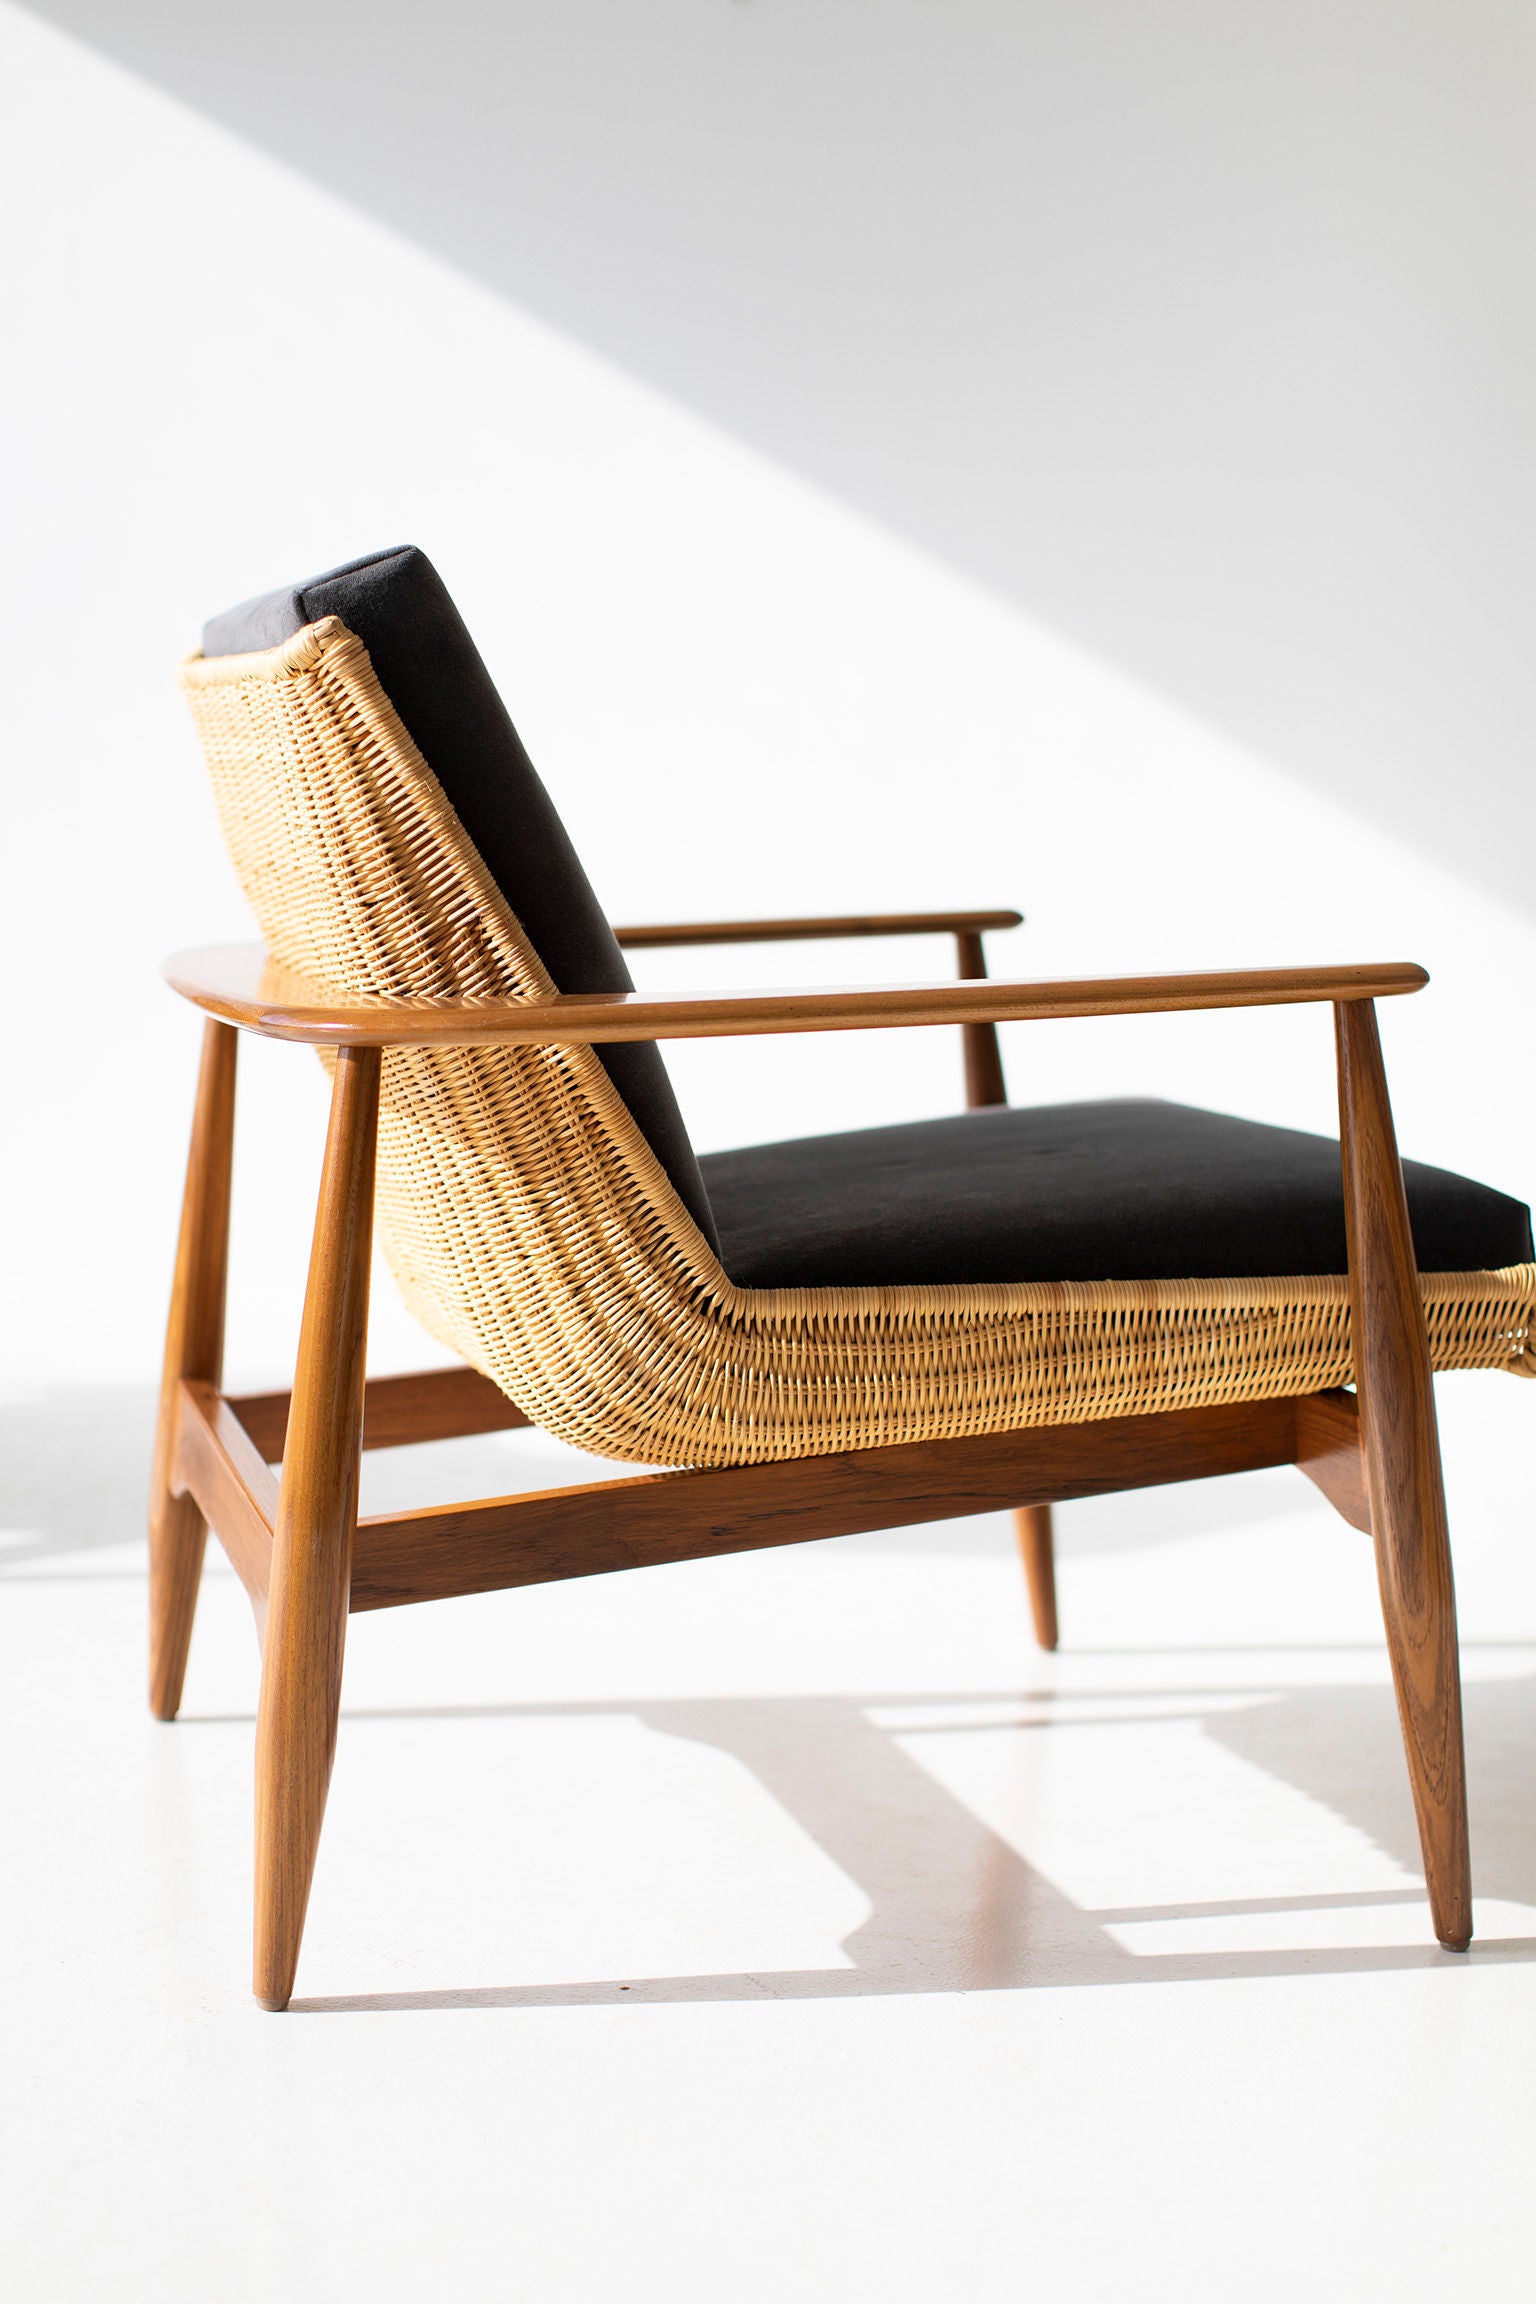 Lawrence-Peabody-Wicker-Lounge-Chair-Craft-Associates-Furniture-05